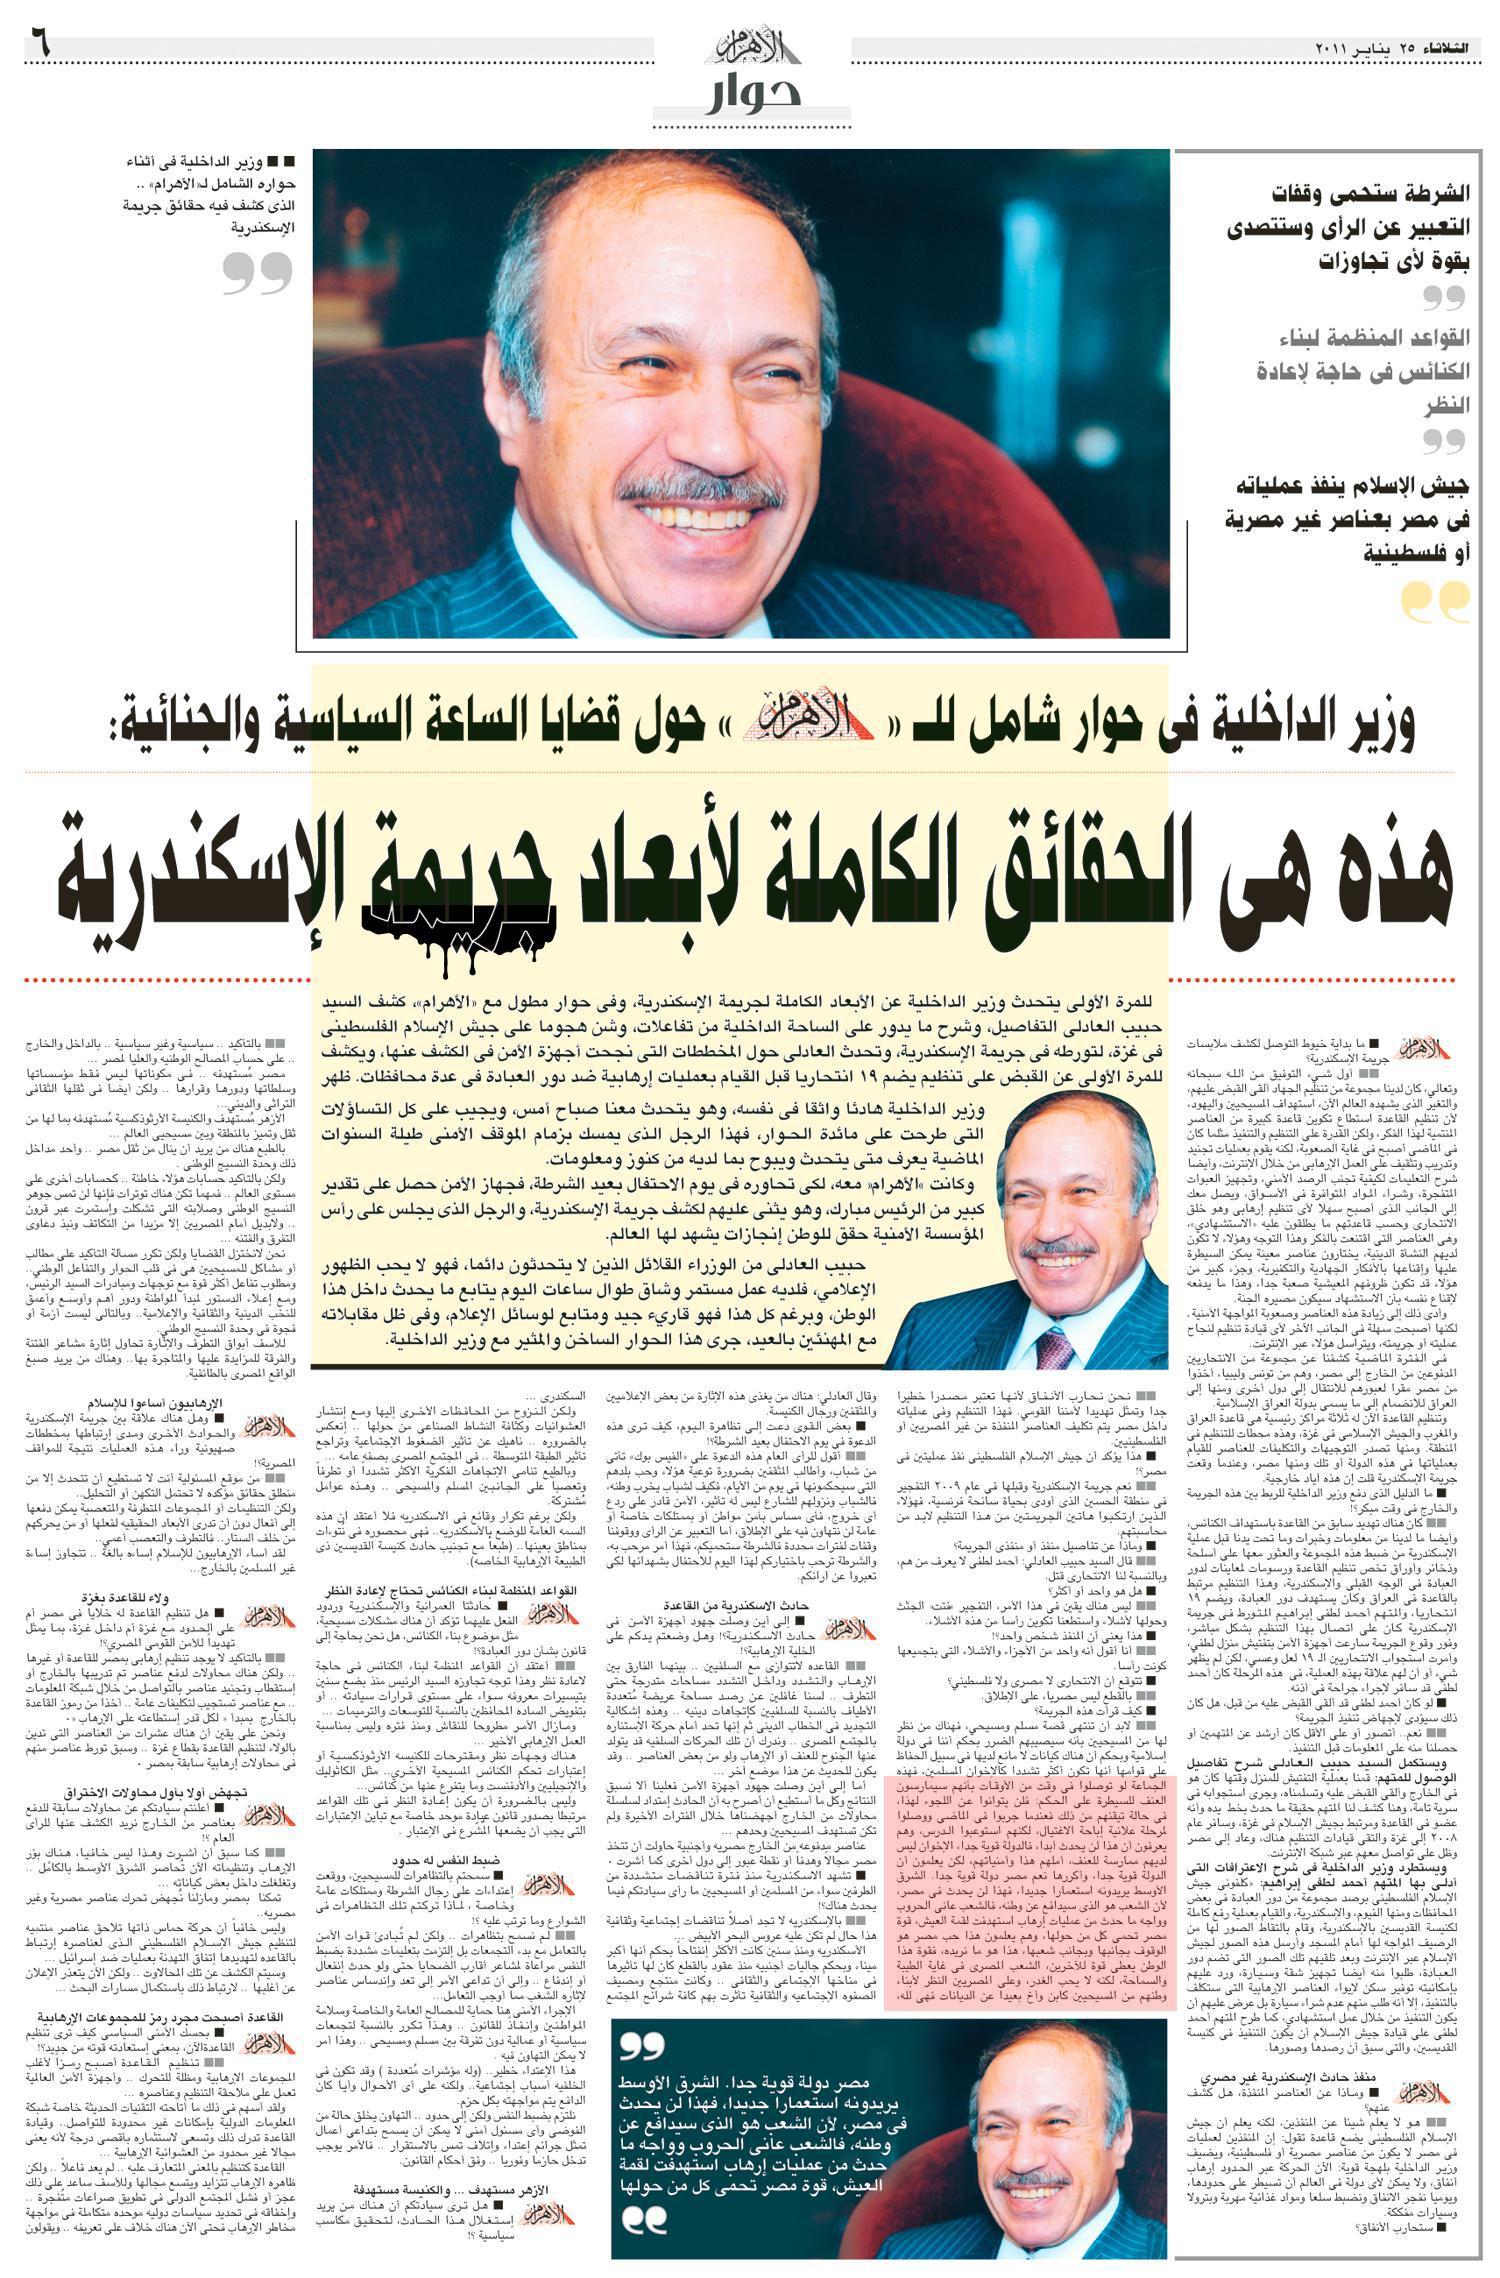 Minister of Interiors Habib Al-Adly interview as appeared on page 6 of the Egyptian daily Al-Ahram, January 25, 2011.